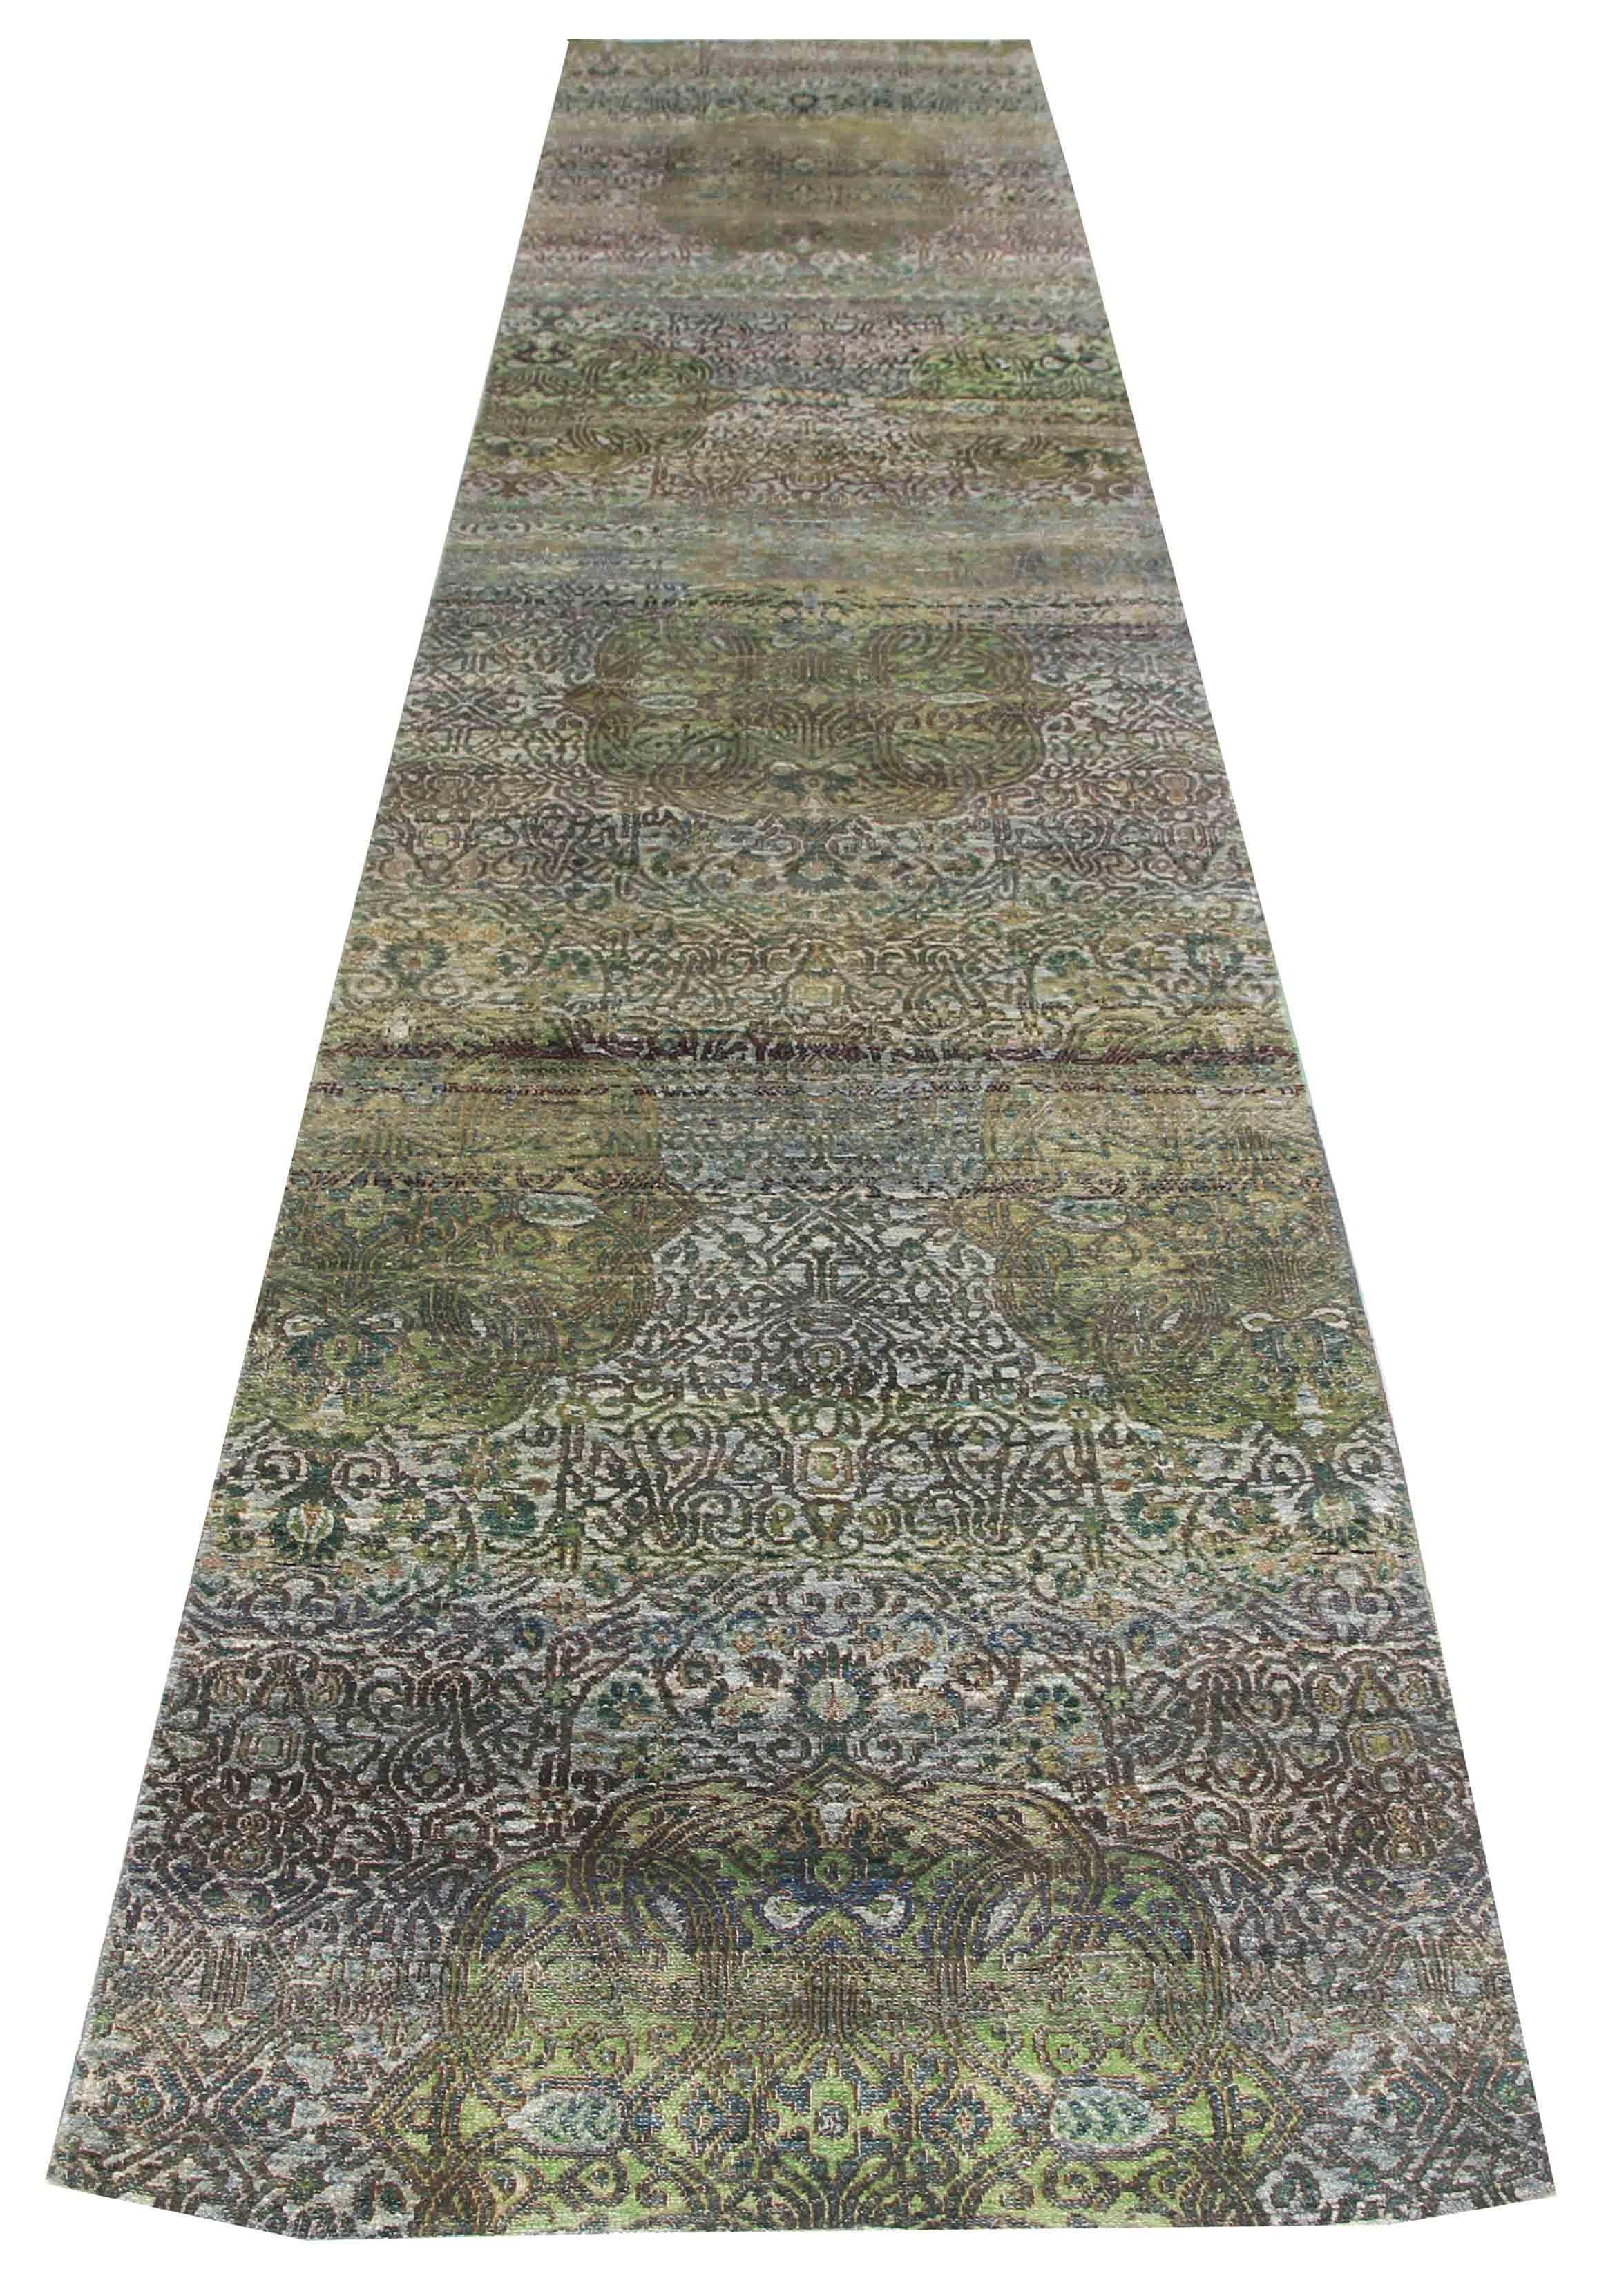 This 3' x 15' silk distressed runner rug is a masterpiece of art that brings together vintage and modern styles. The rug has been transformed by skilled artisans through a series of processes, including washing, sunning, and shearing, resulting in a